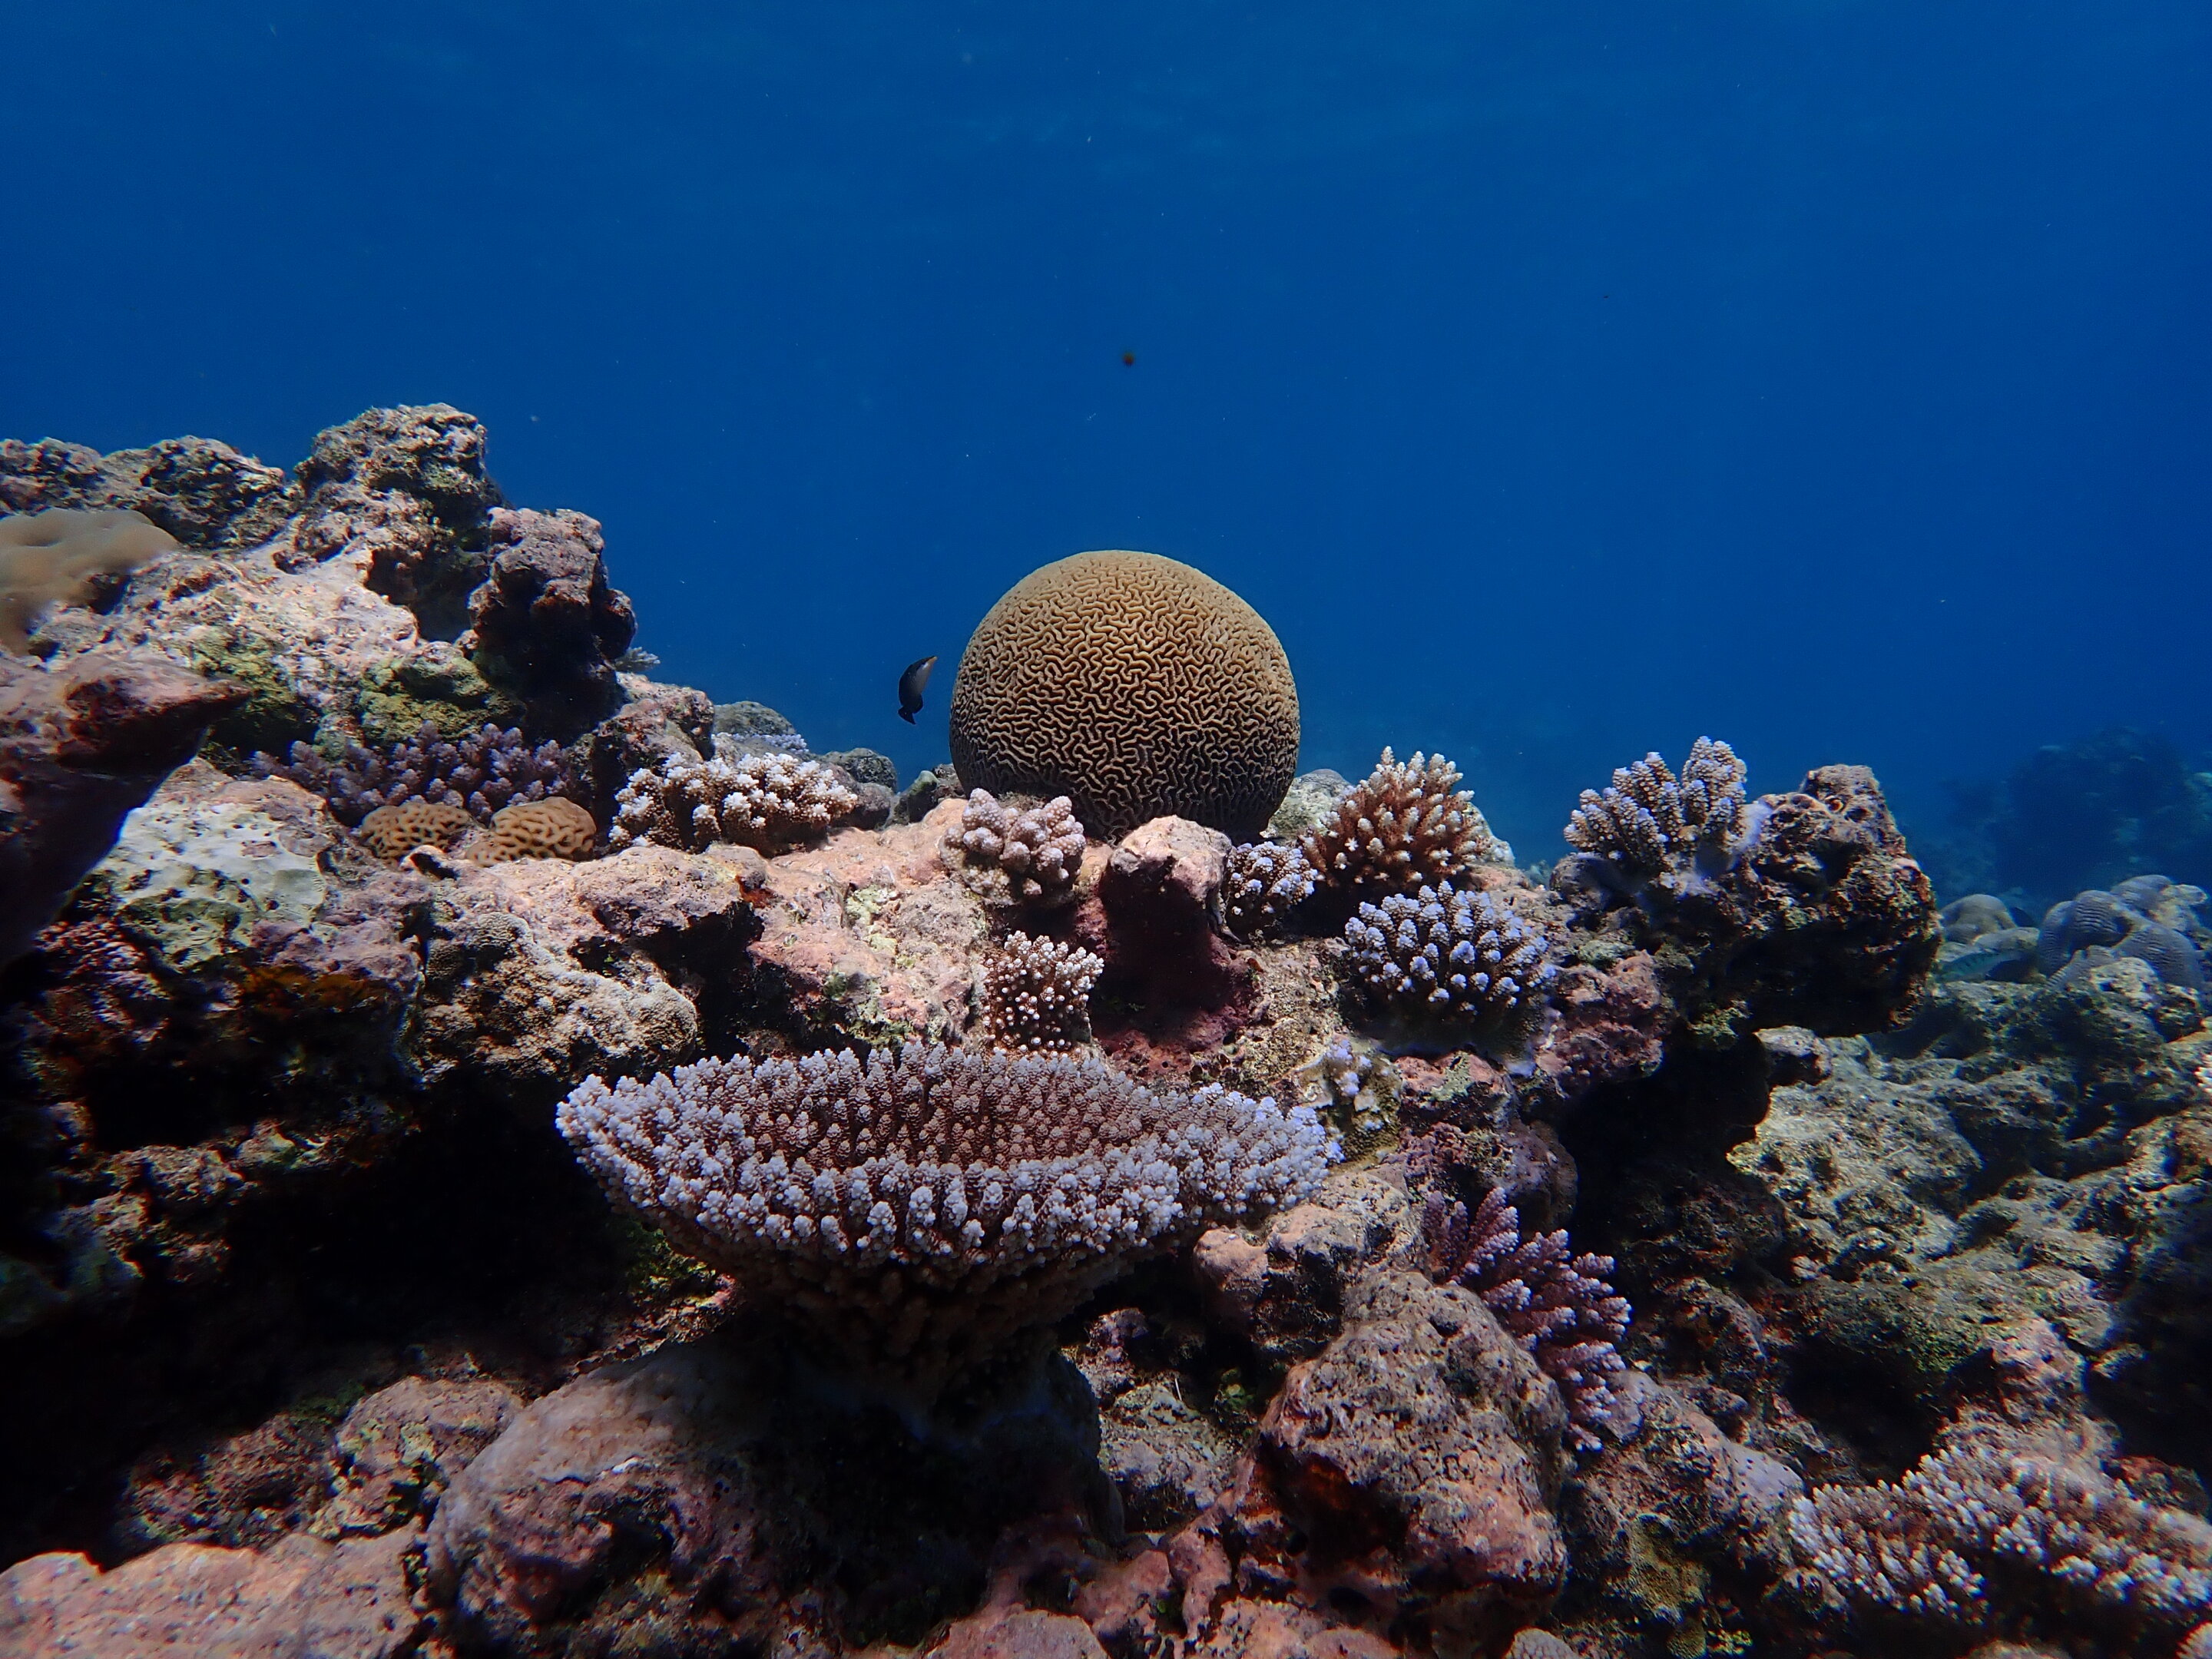 CASE STUDY: Pacific coral reef management in a changing climate